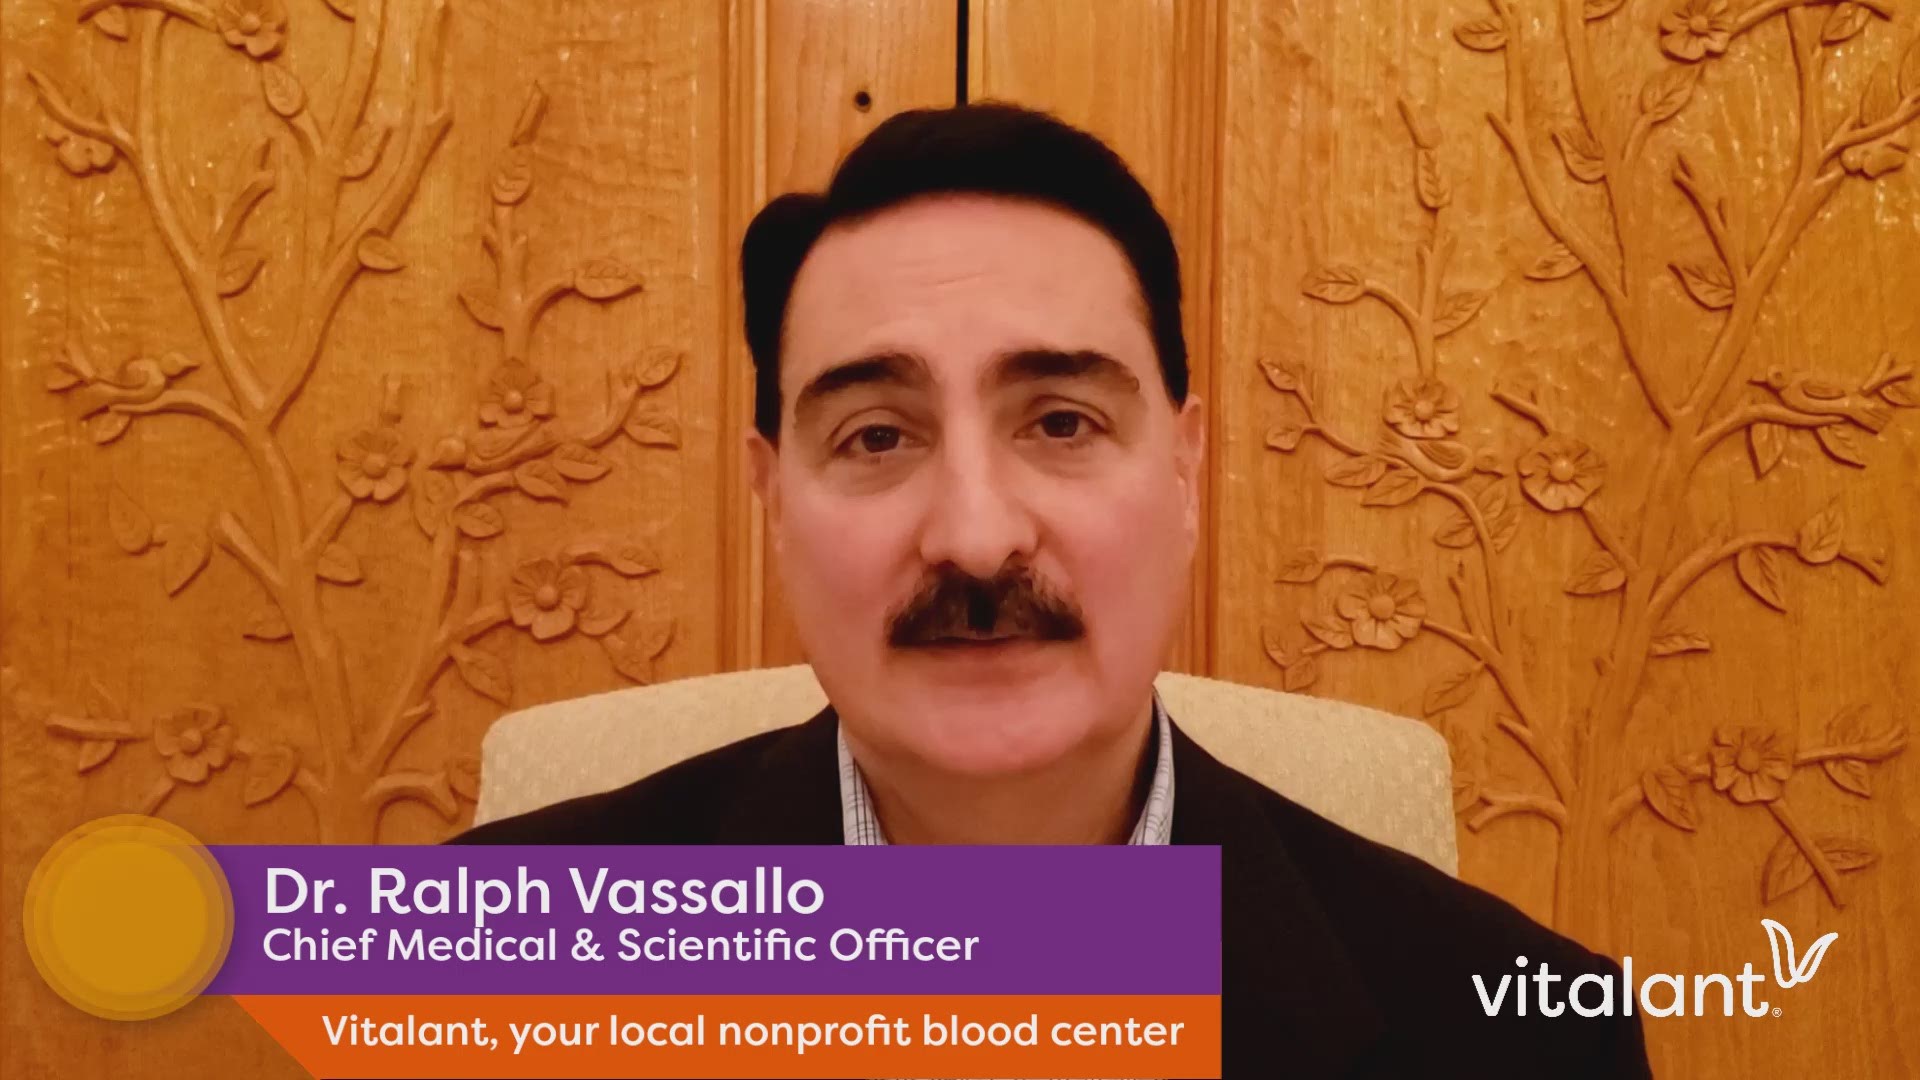 Vassallo said the fear of coronavirus is resulting in national blood shortages. Blood donation is an essential function that cannot be disrupted.